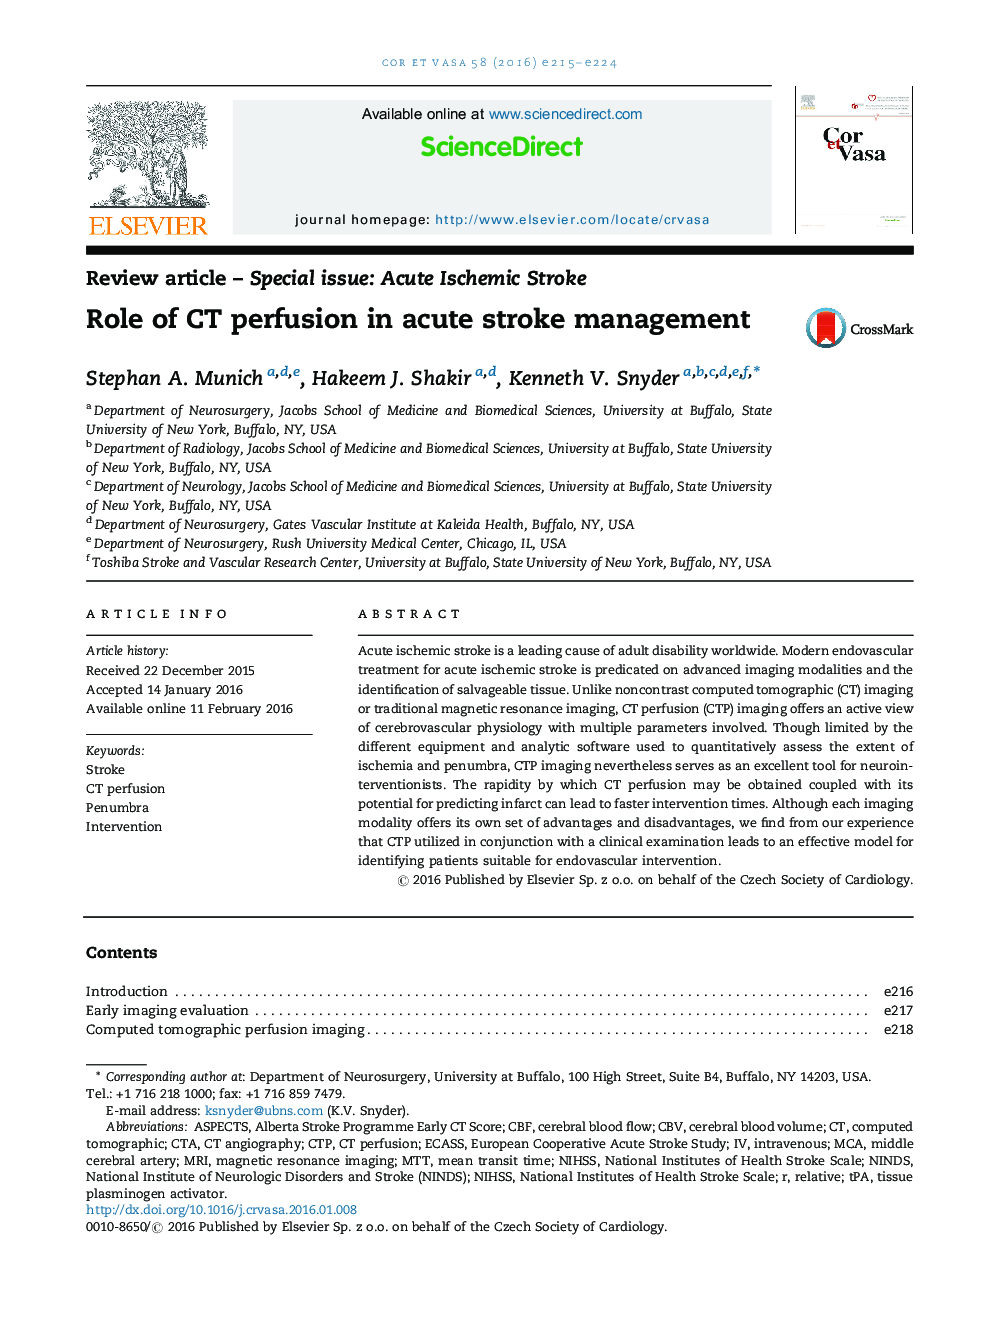 Role of CT perfusion in acute stroke management